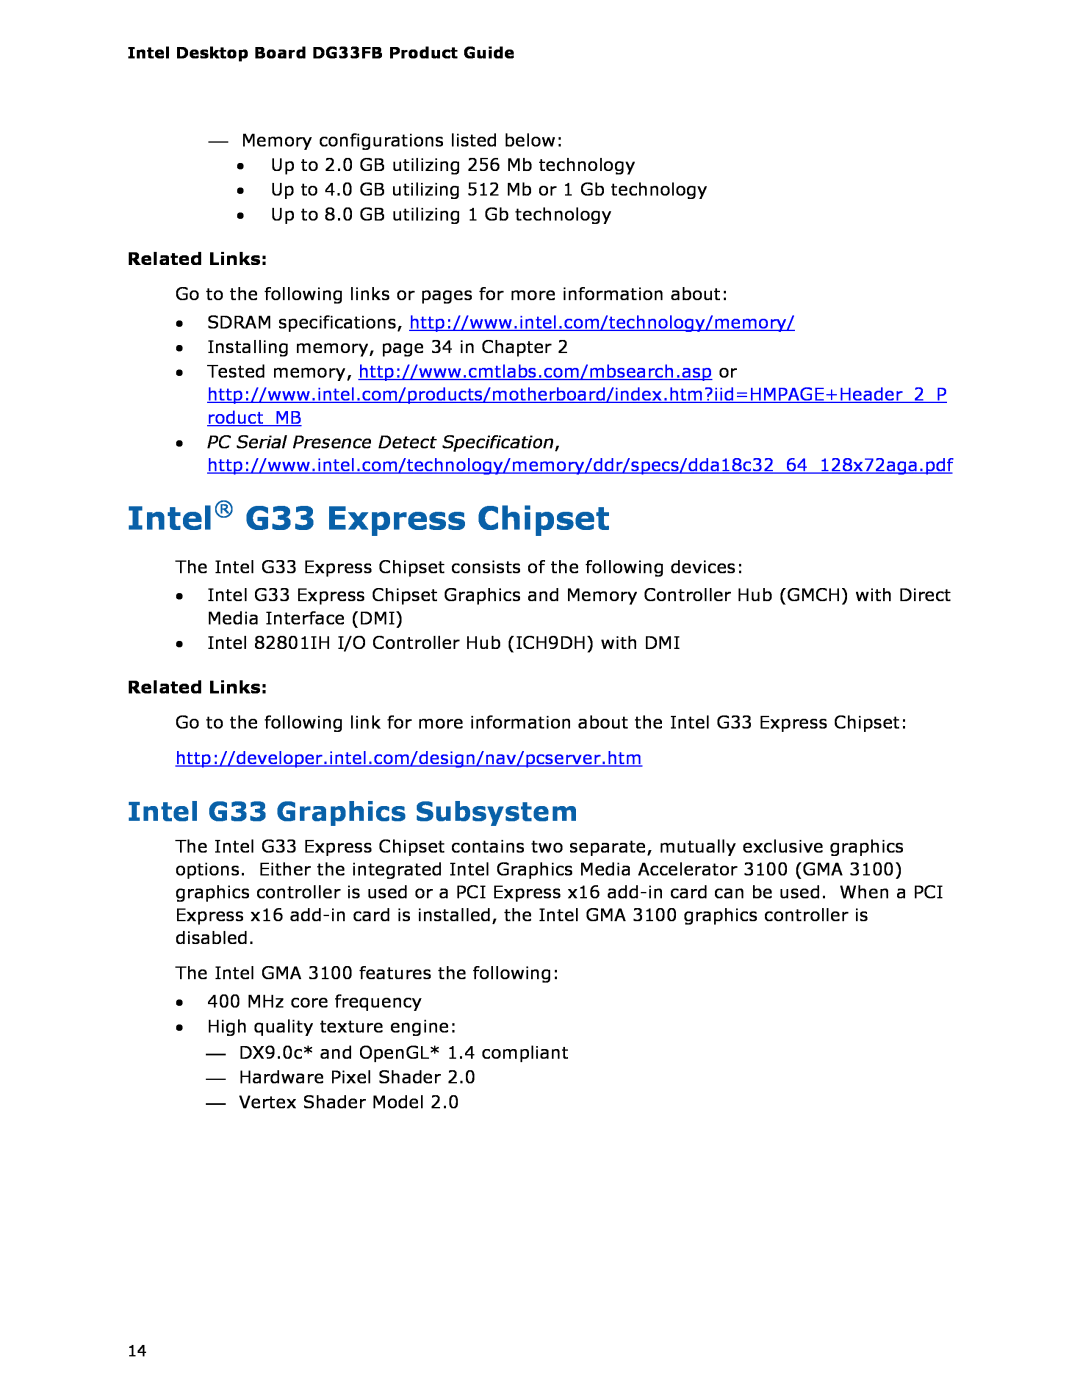 Intel DG33FB manual Intel G33 Express Chipset, Intel G33 Graphics Subsystem, Related Links 